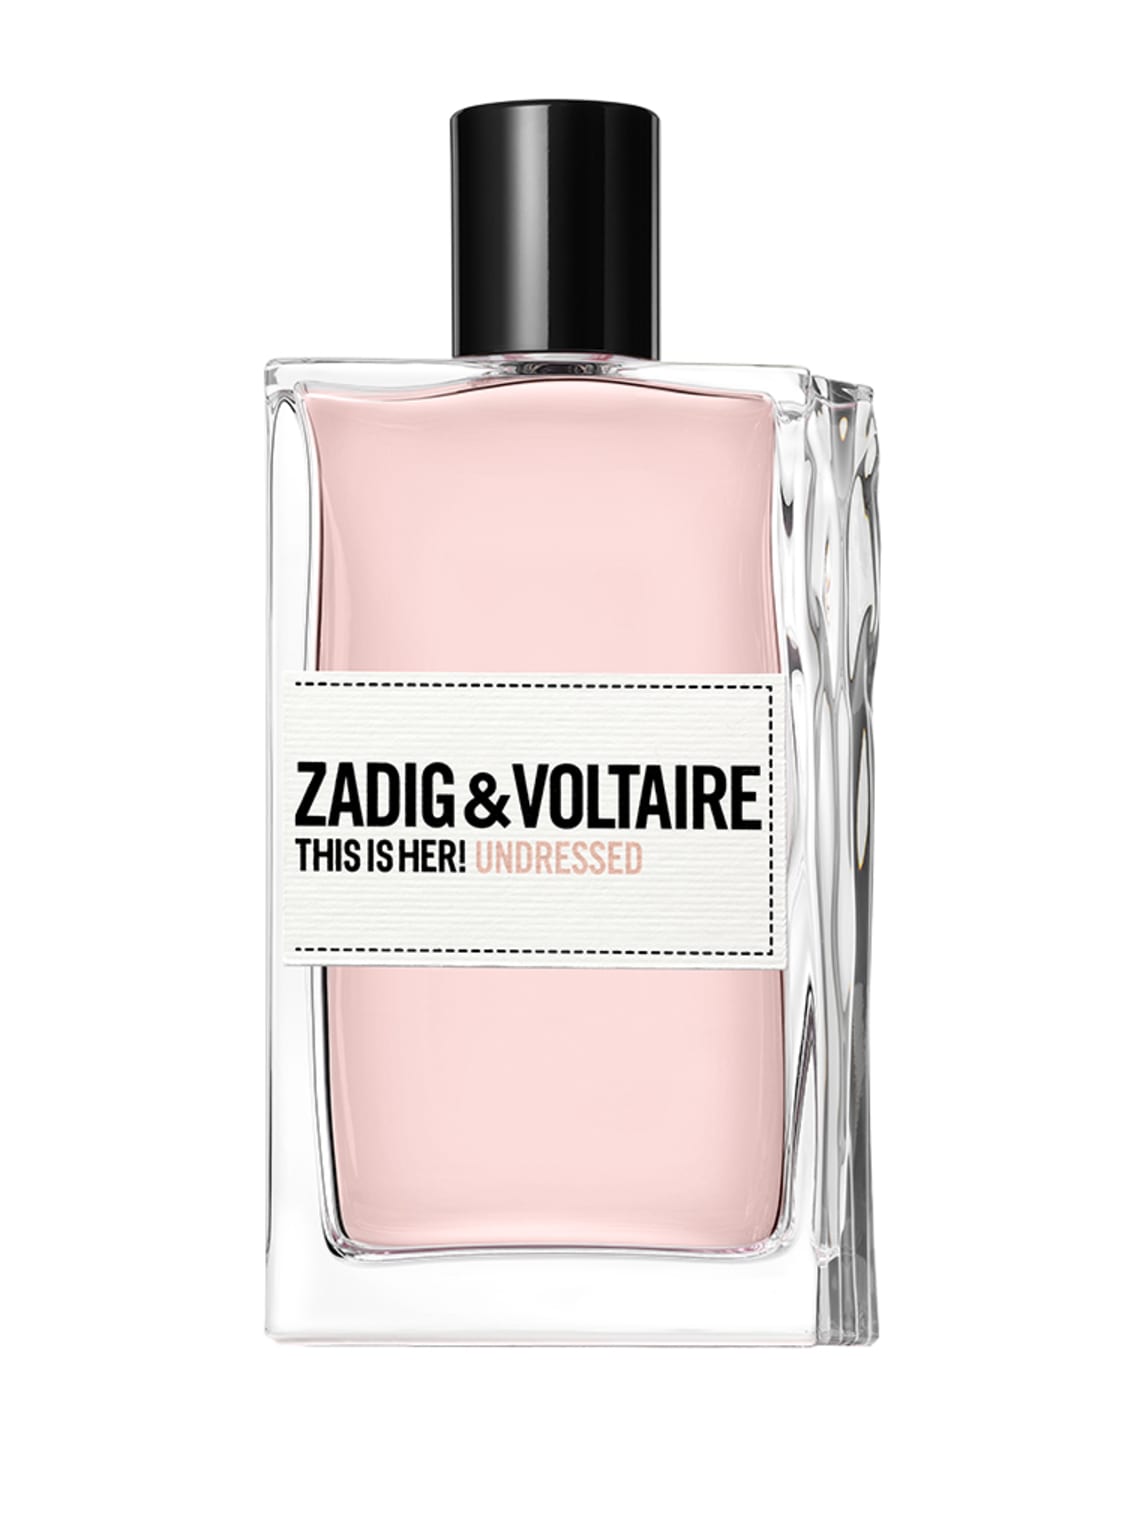 Zadig & Voltaire Fragrances This Is Her! Undressed Eau de Parfum 50 ml von ZADIG & VOLTAIRE Fragrances